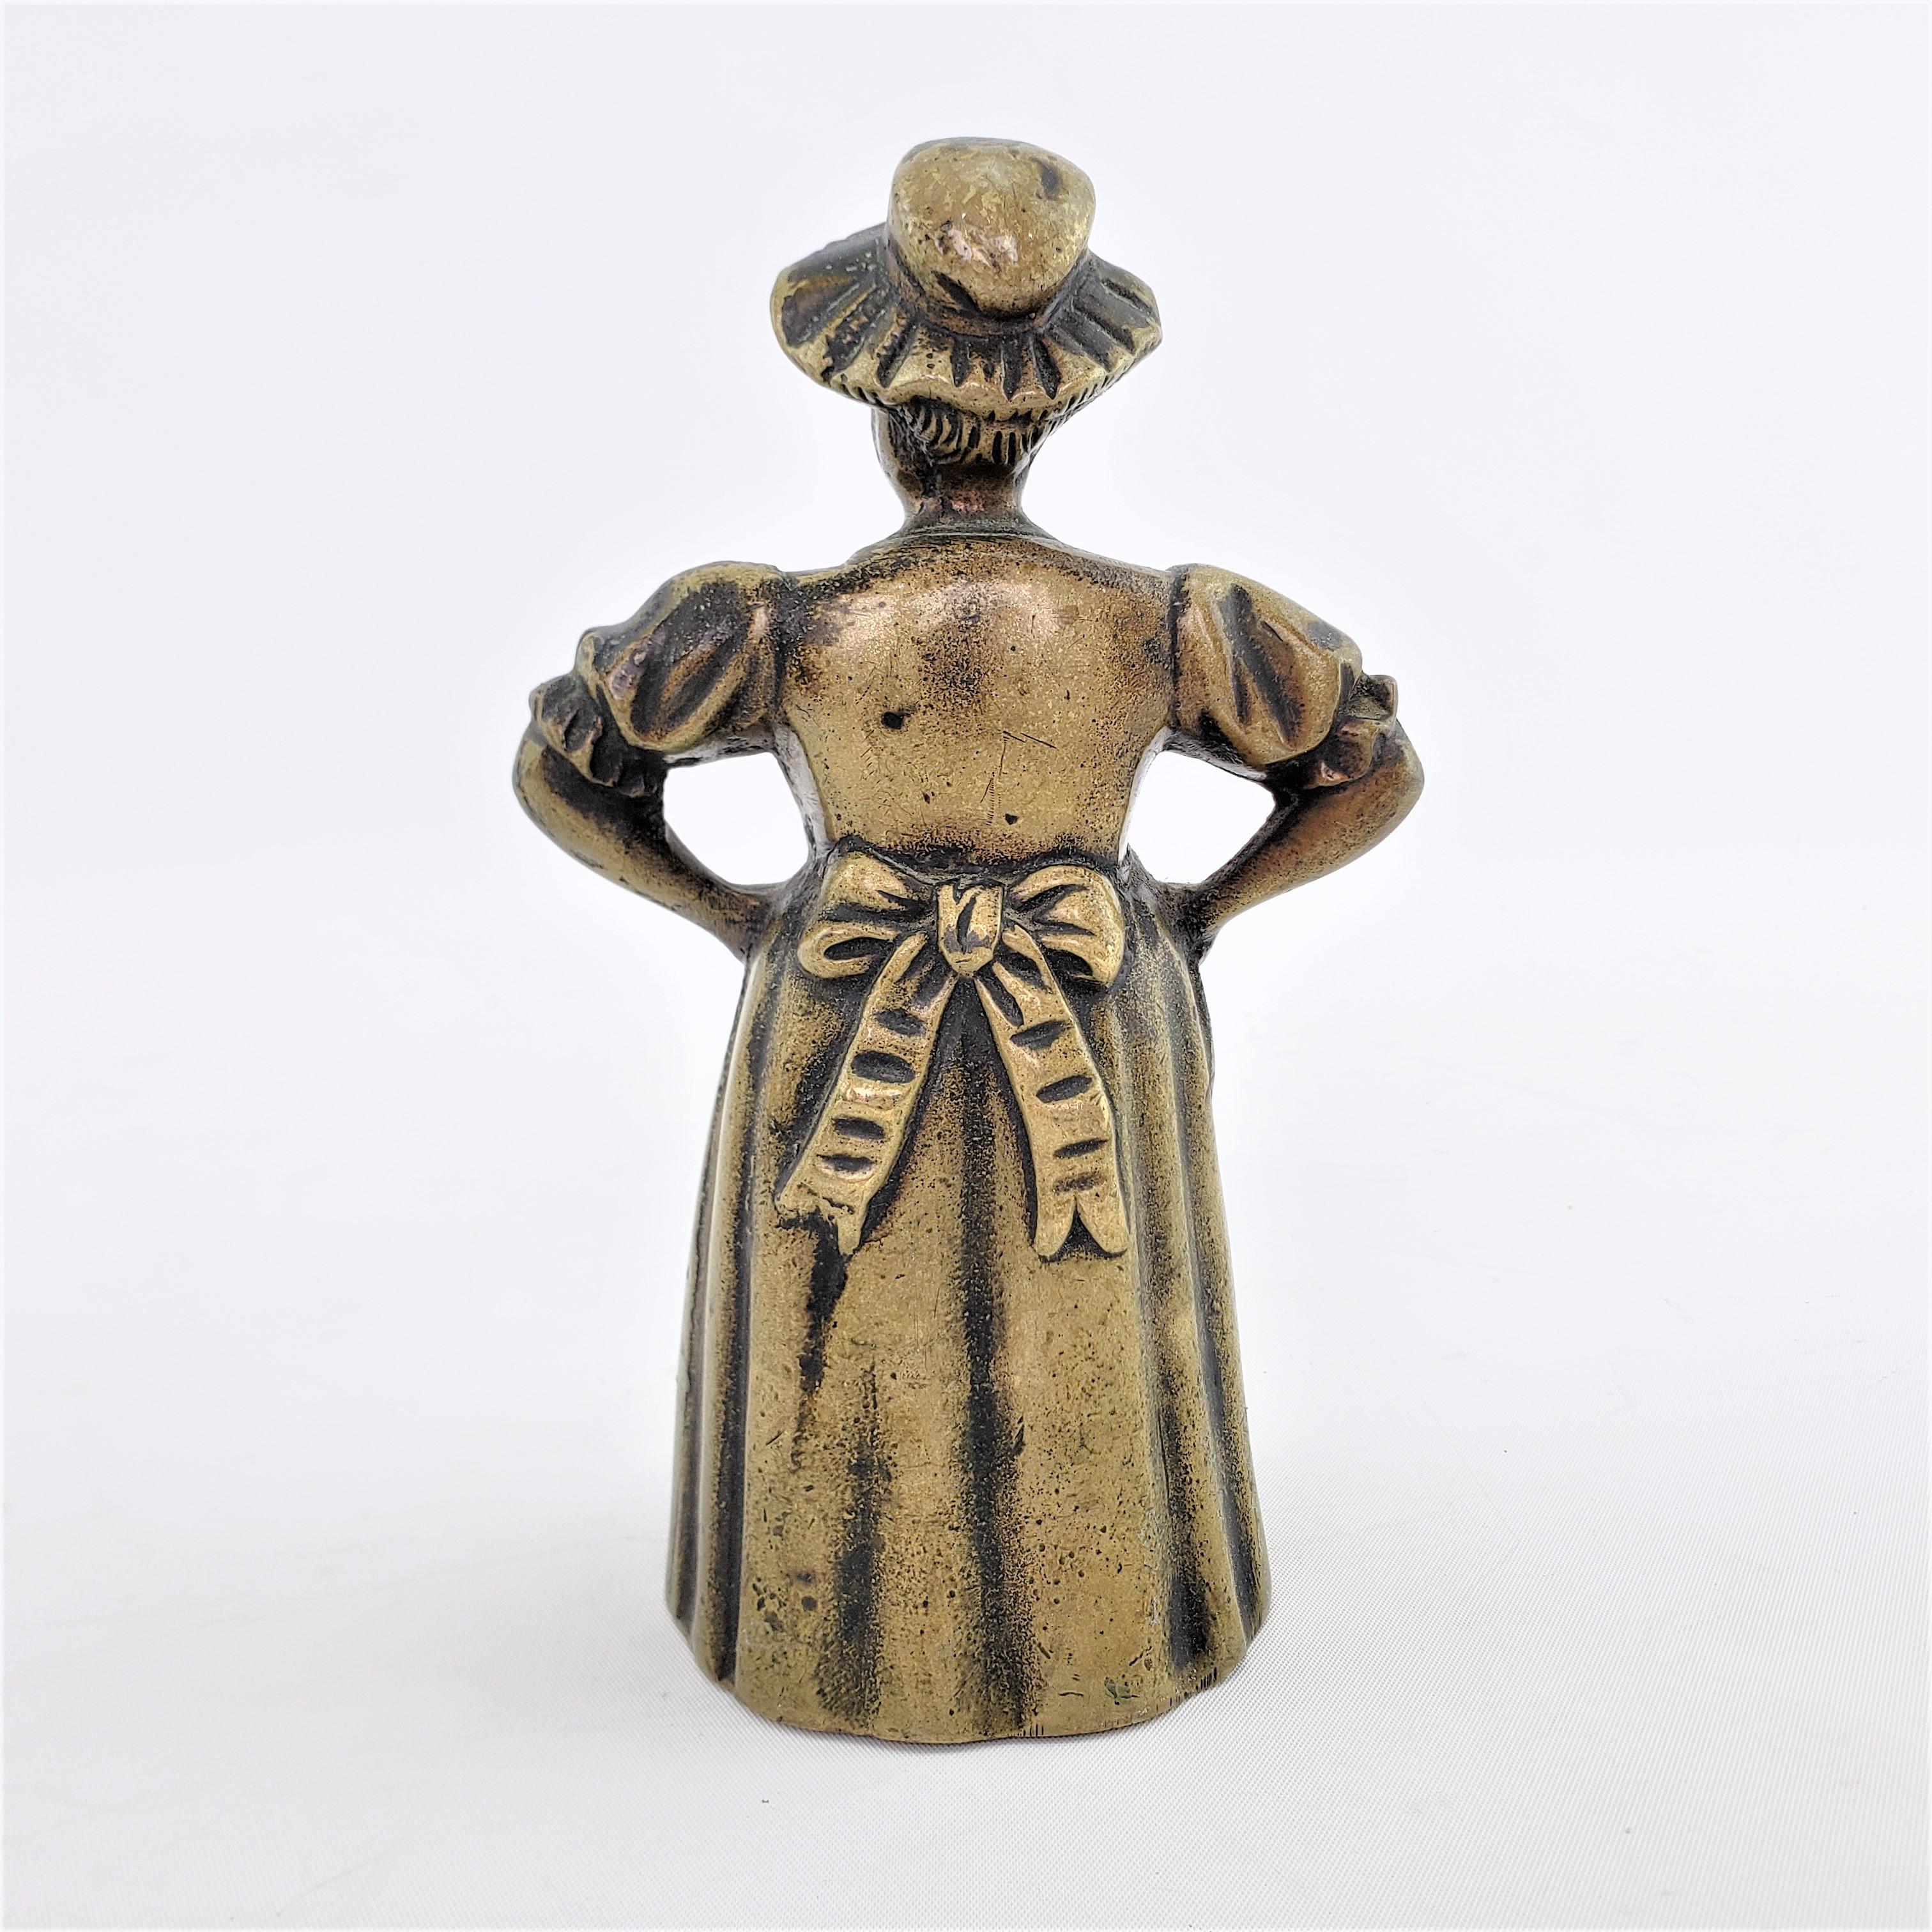 Antique Figural Cast Bronze Dinner Bell with Upset Woman & Shoed Leg Clapper In Good Condition For Sale In Hamilton, Ontario